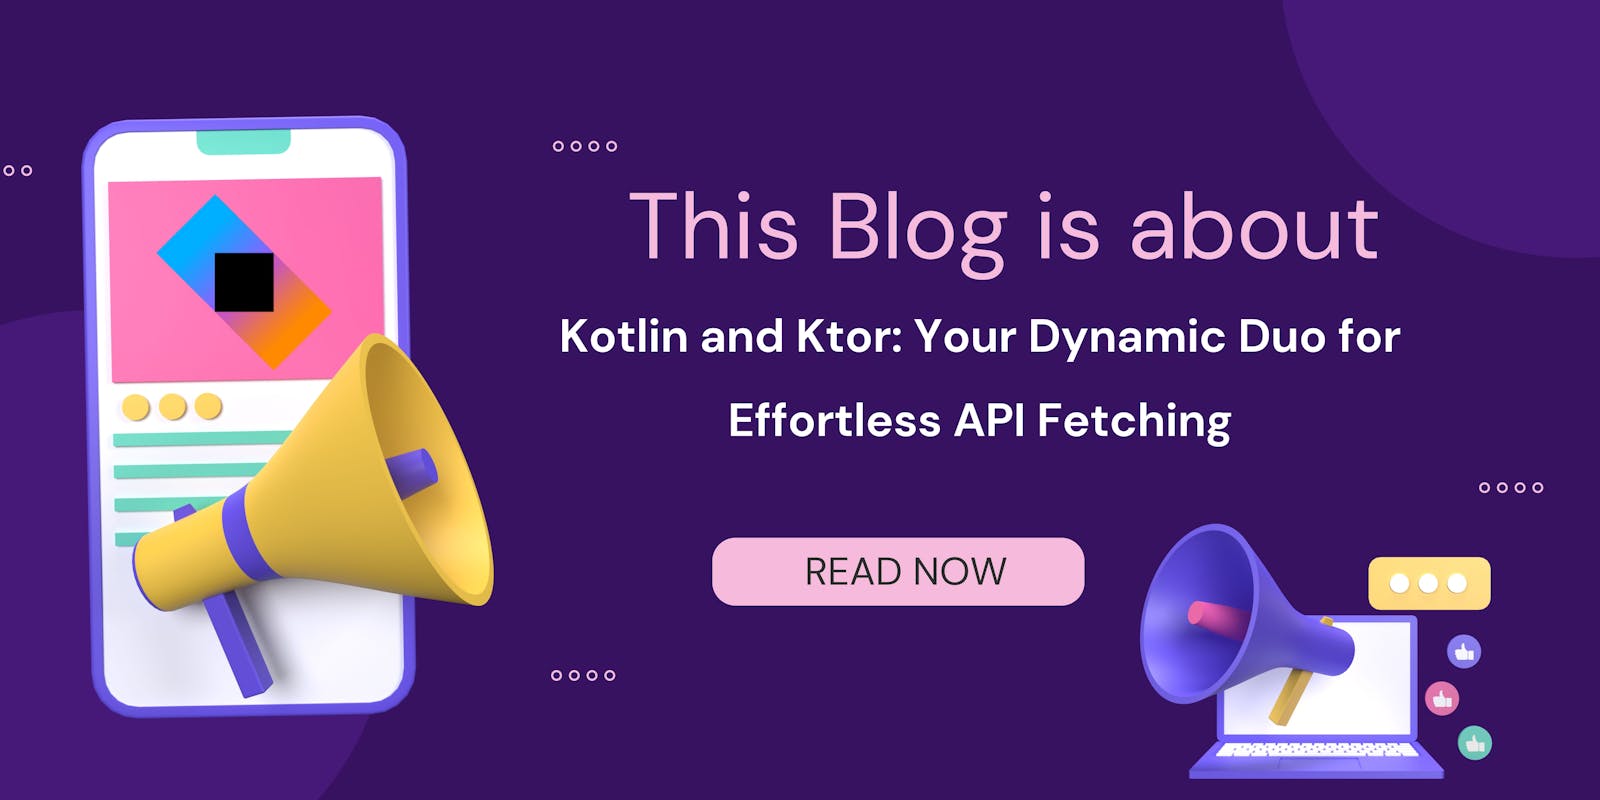 Kotlin and Ktor: Your Dynamic Duo for Effortless API Fetching